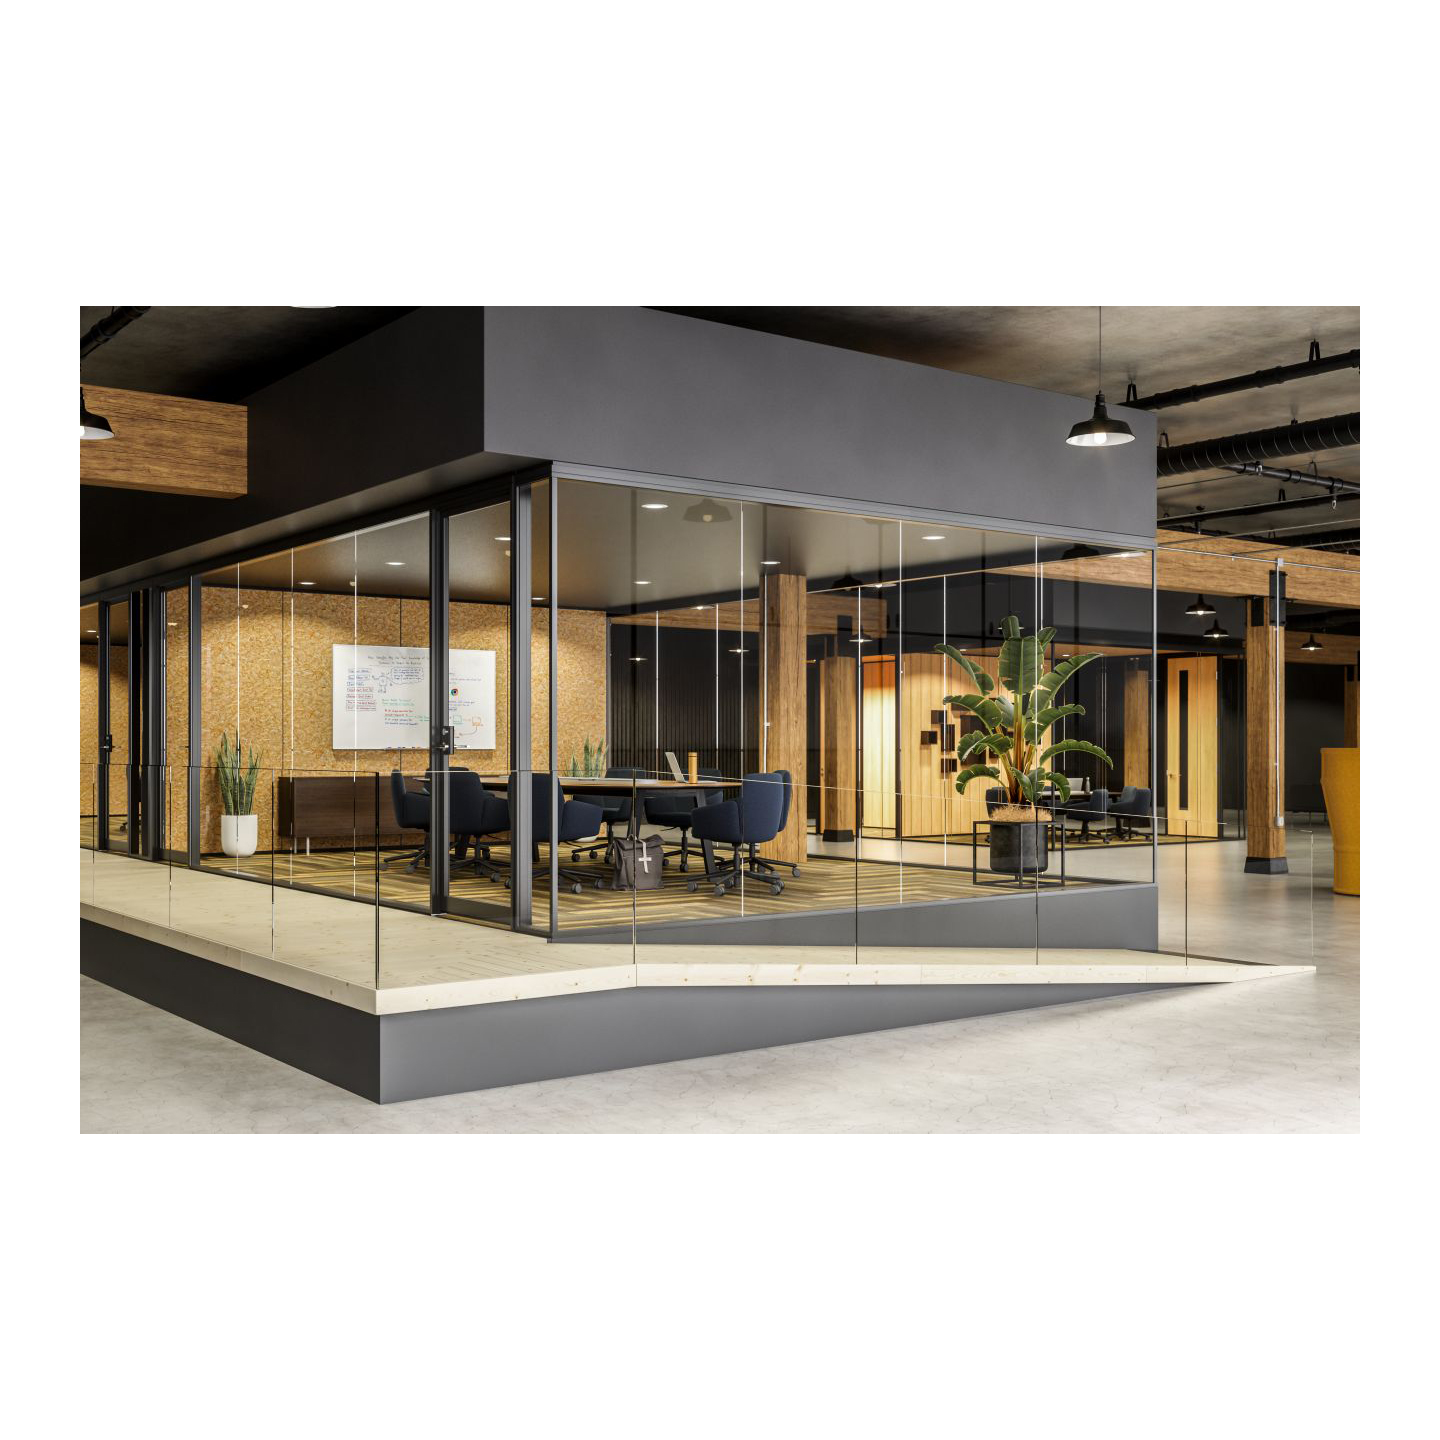 Haworth Enclose Frameless Glass 2 Wall for private meeting room in an open office space with white floor and black ceilings 